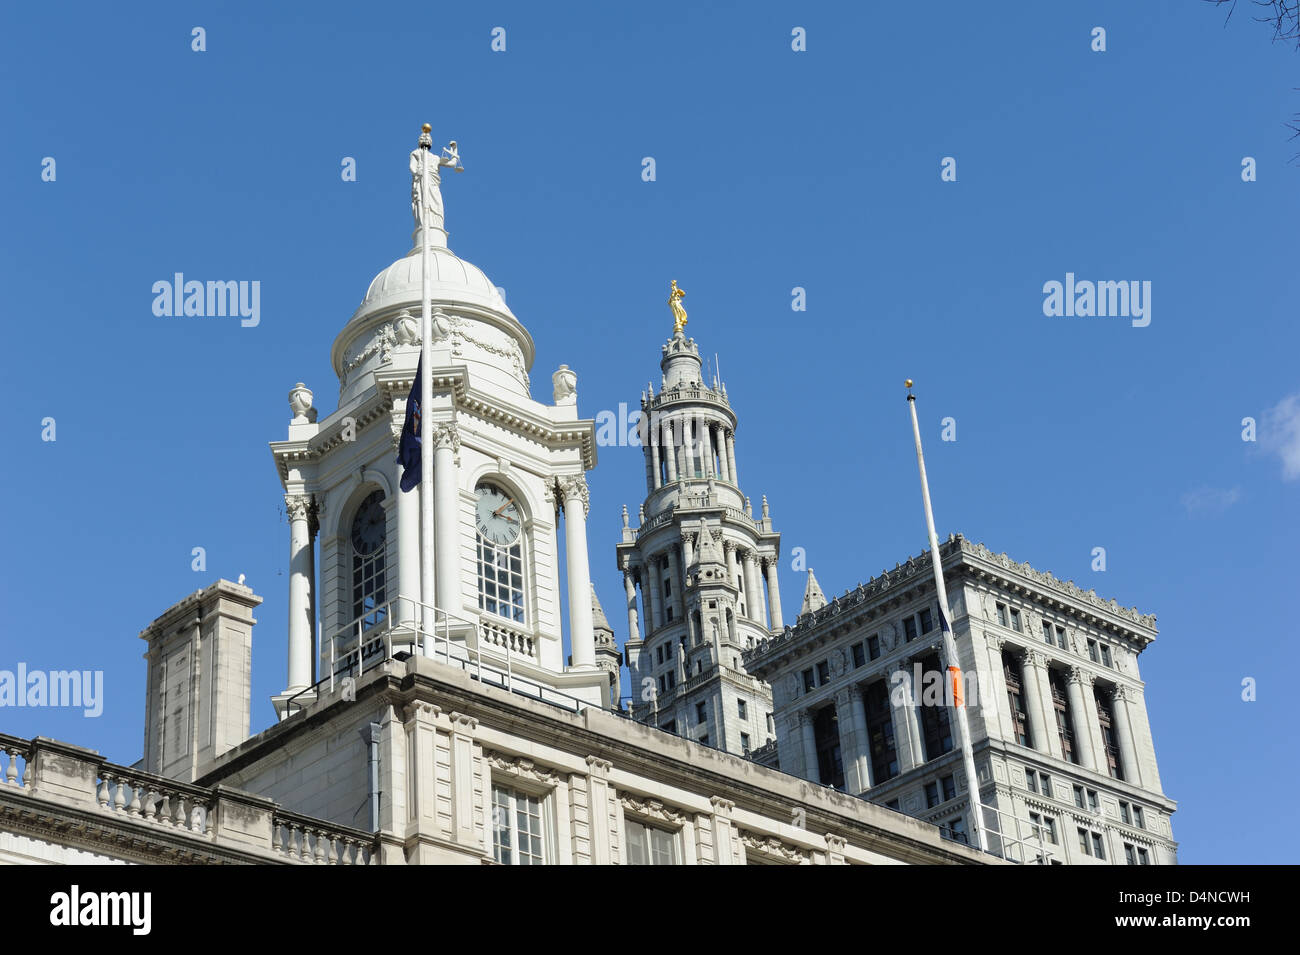 The cupola of New York's City Hall and of the city's Municipal Building, topped by a statue of Civic Fame. Stock Photo